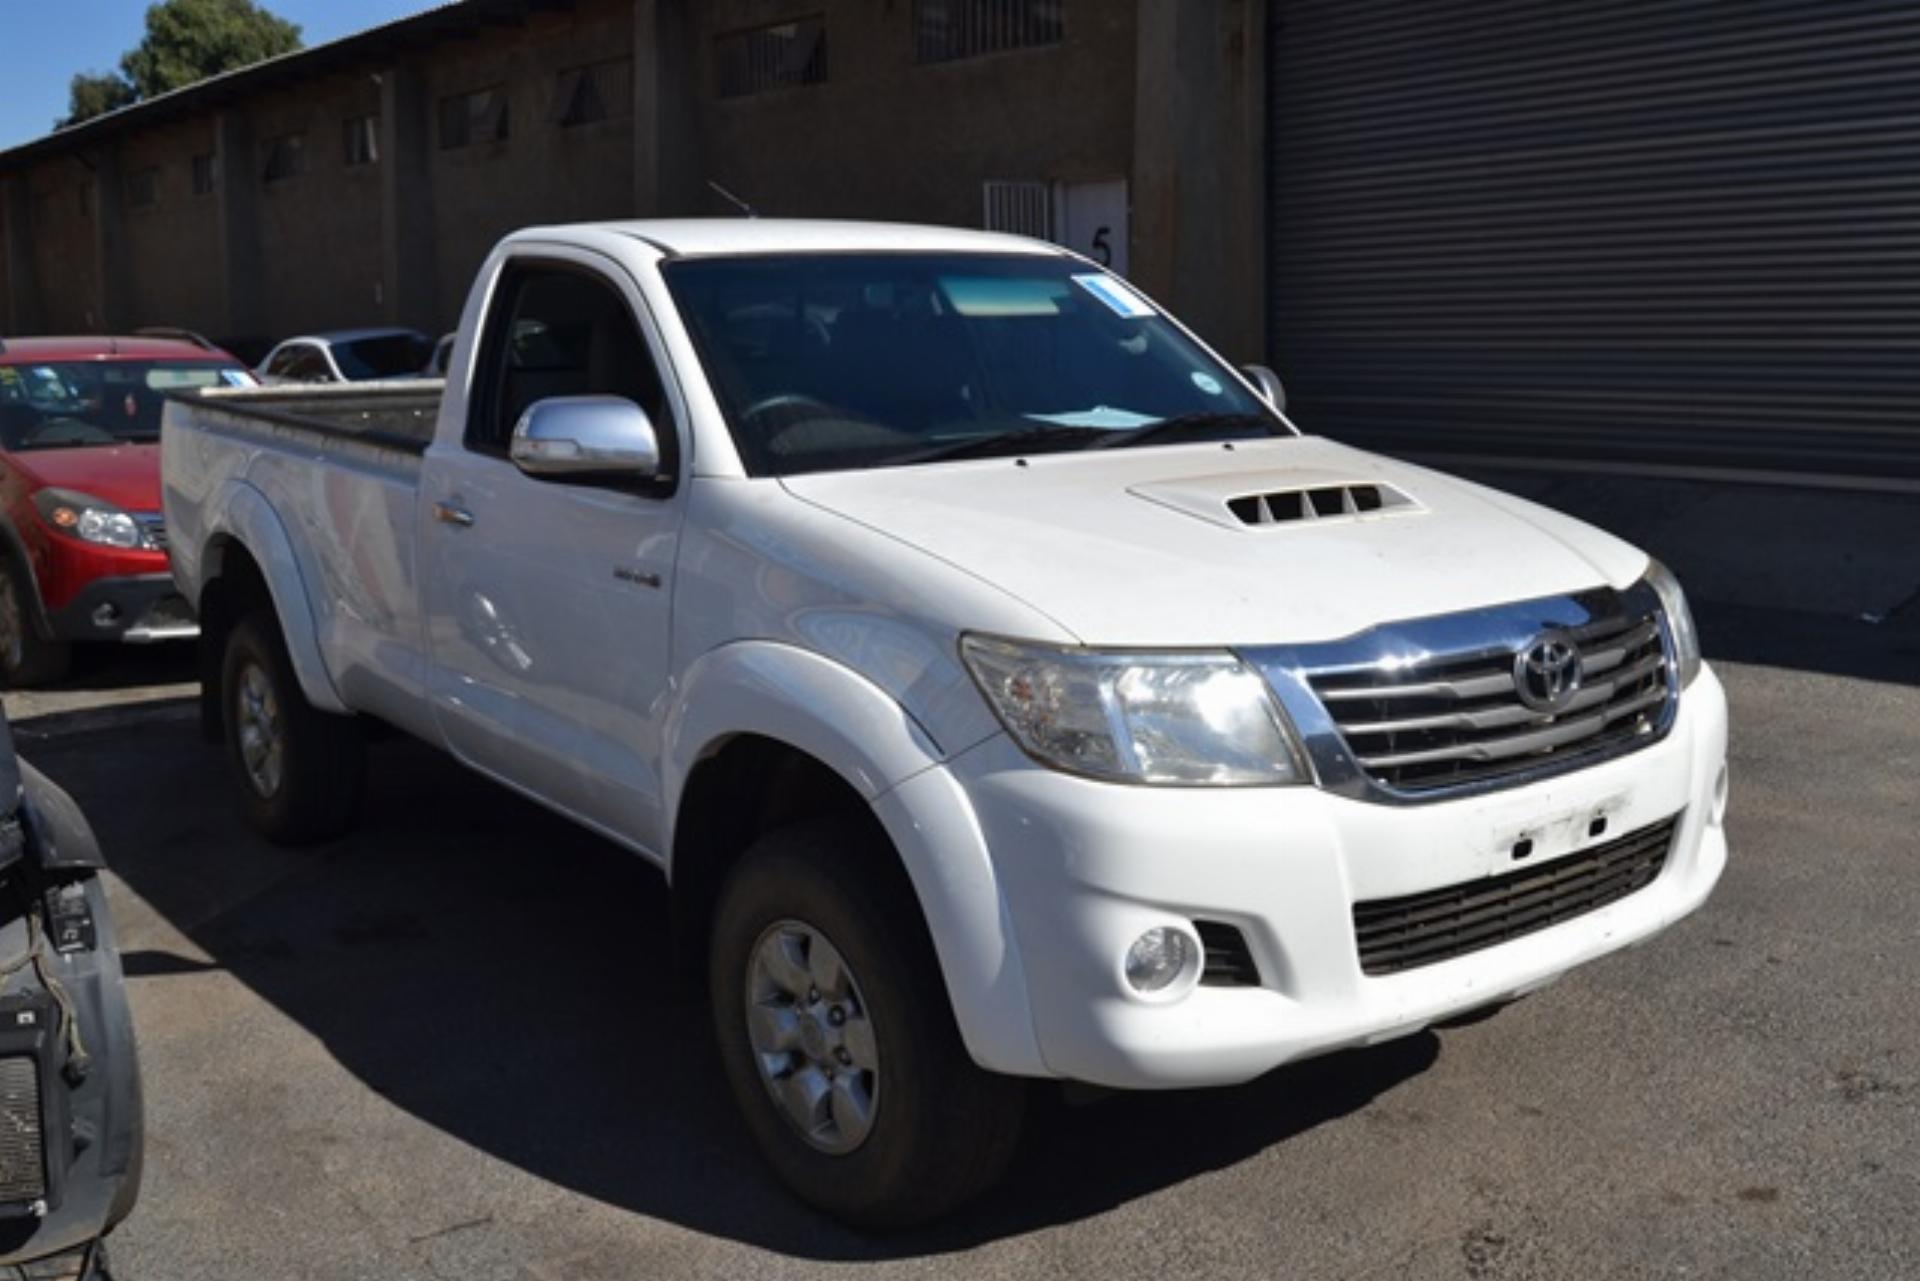 Repossessed Toyota Hilux 3.0 D4D 2012 on auction MC44505